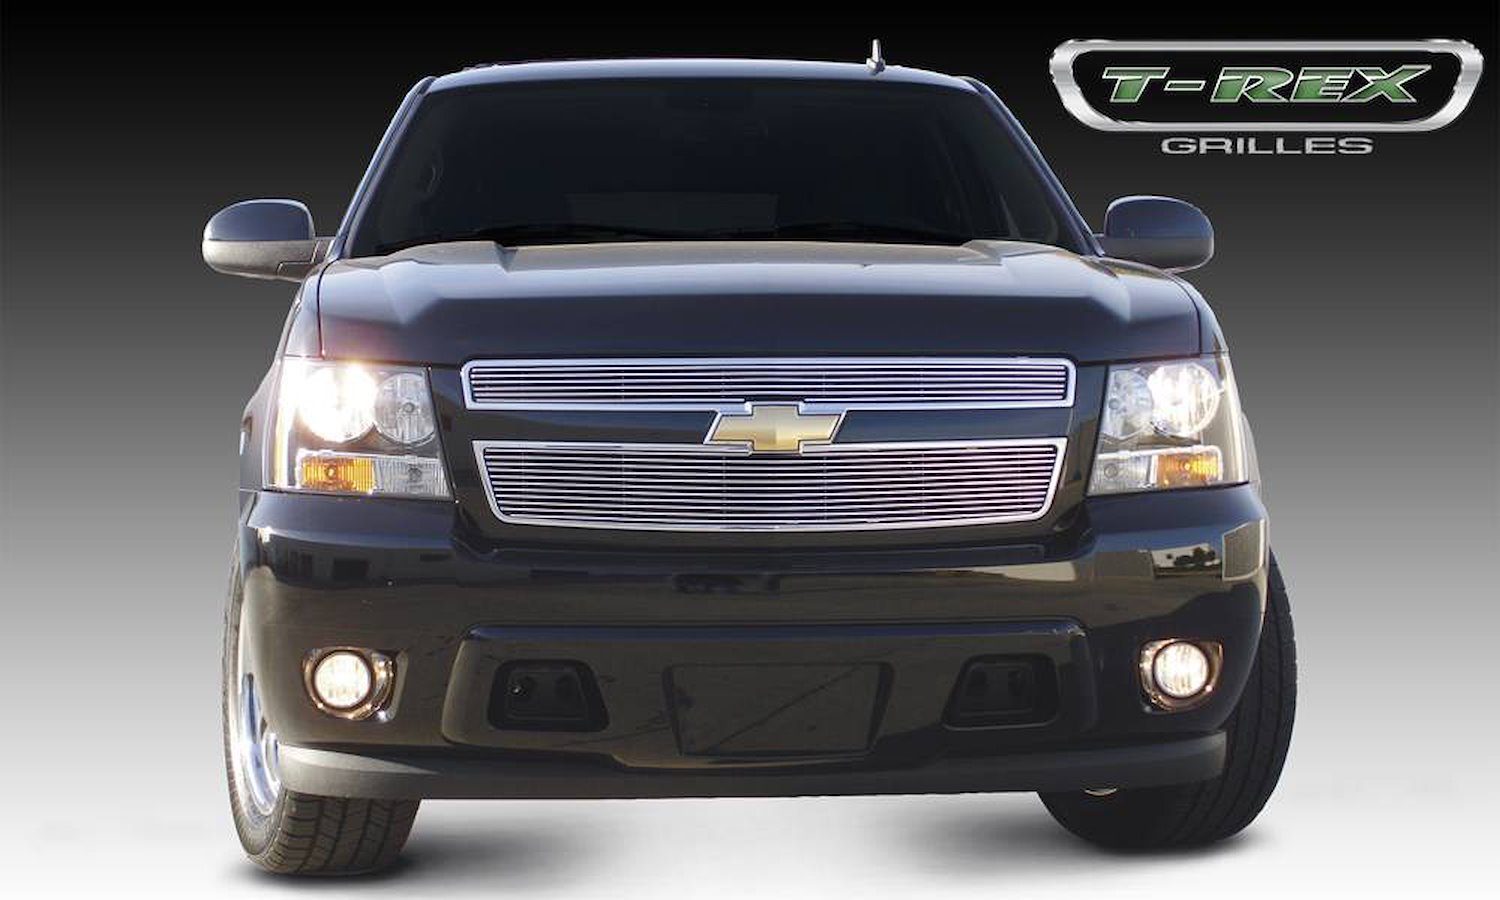 Billet Grille Overlay 2007-2013 Chevrolet Tahoe, Suburban, Avalanche